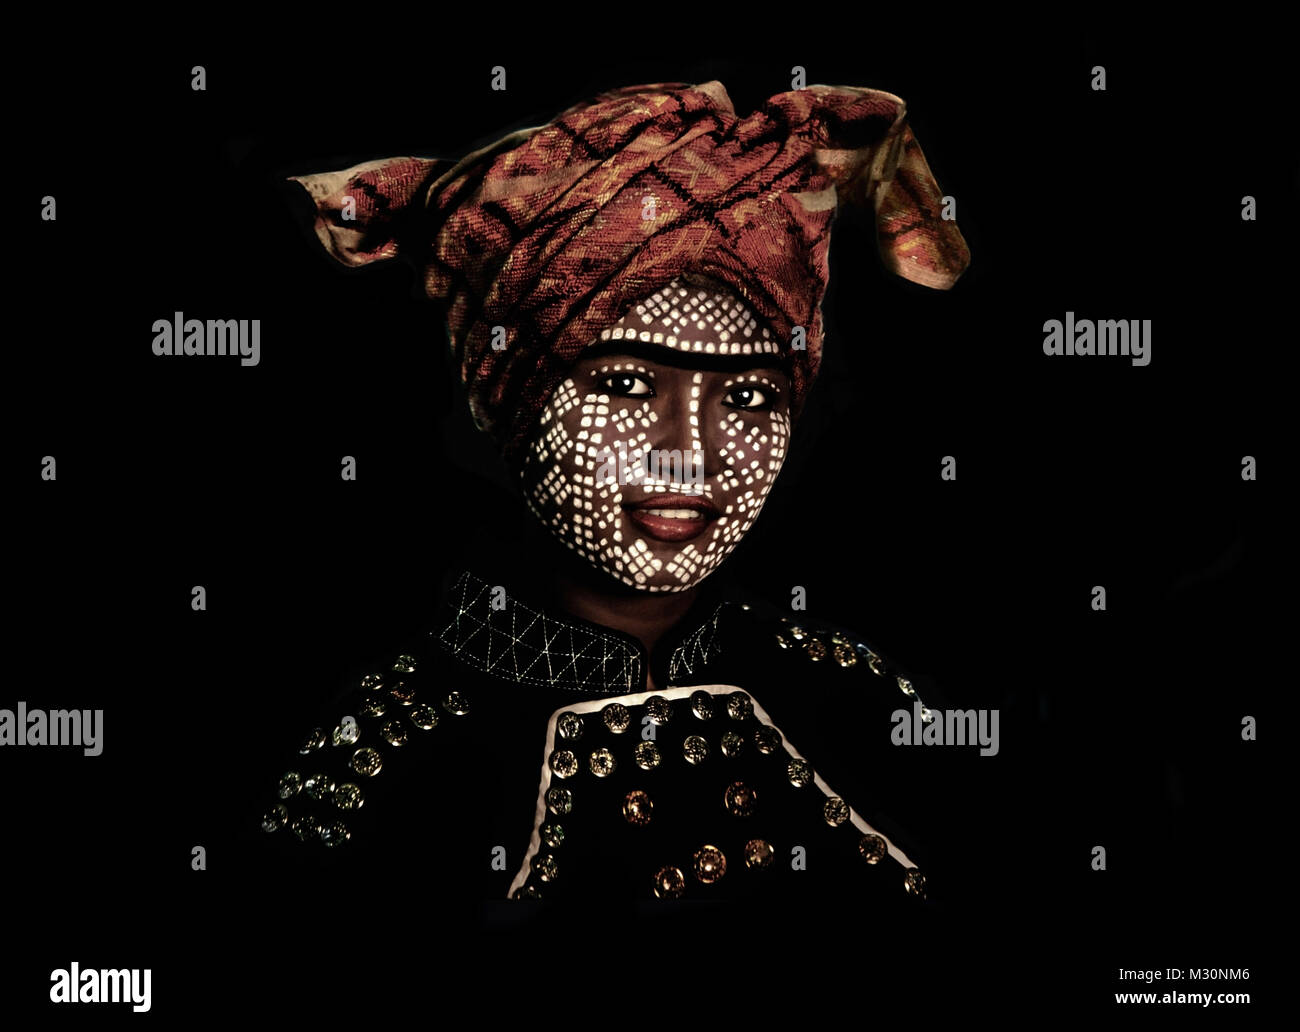 Woman with painted face, portrait, Isabela City, Basilan Island, Philippines, Asia Stock Photo